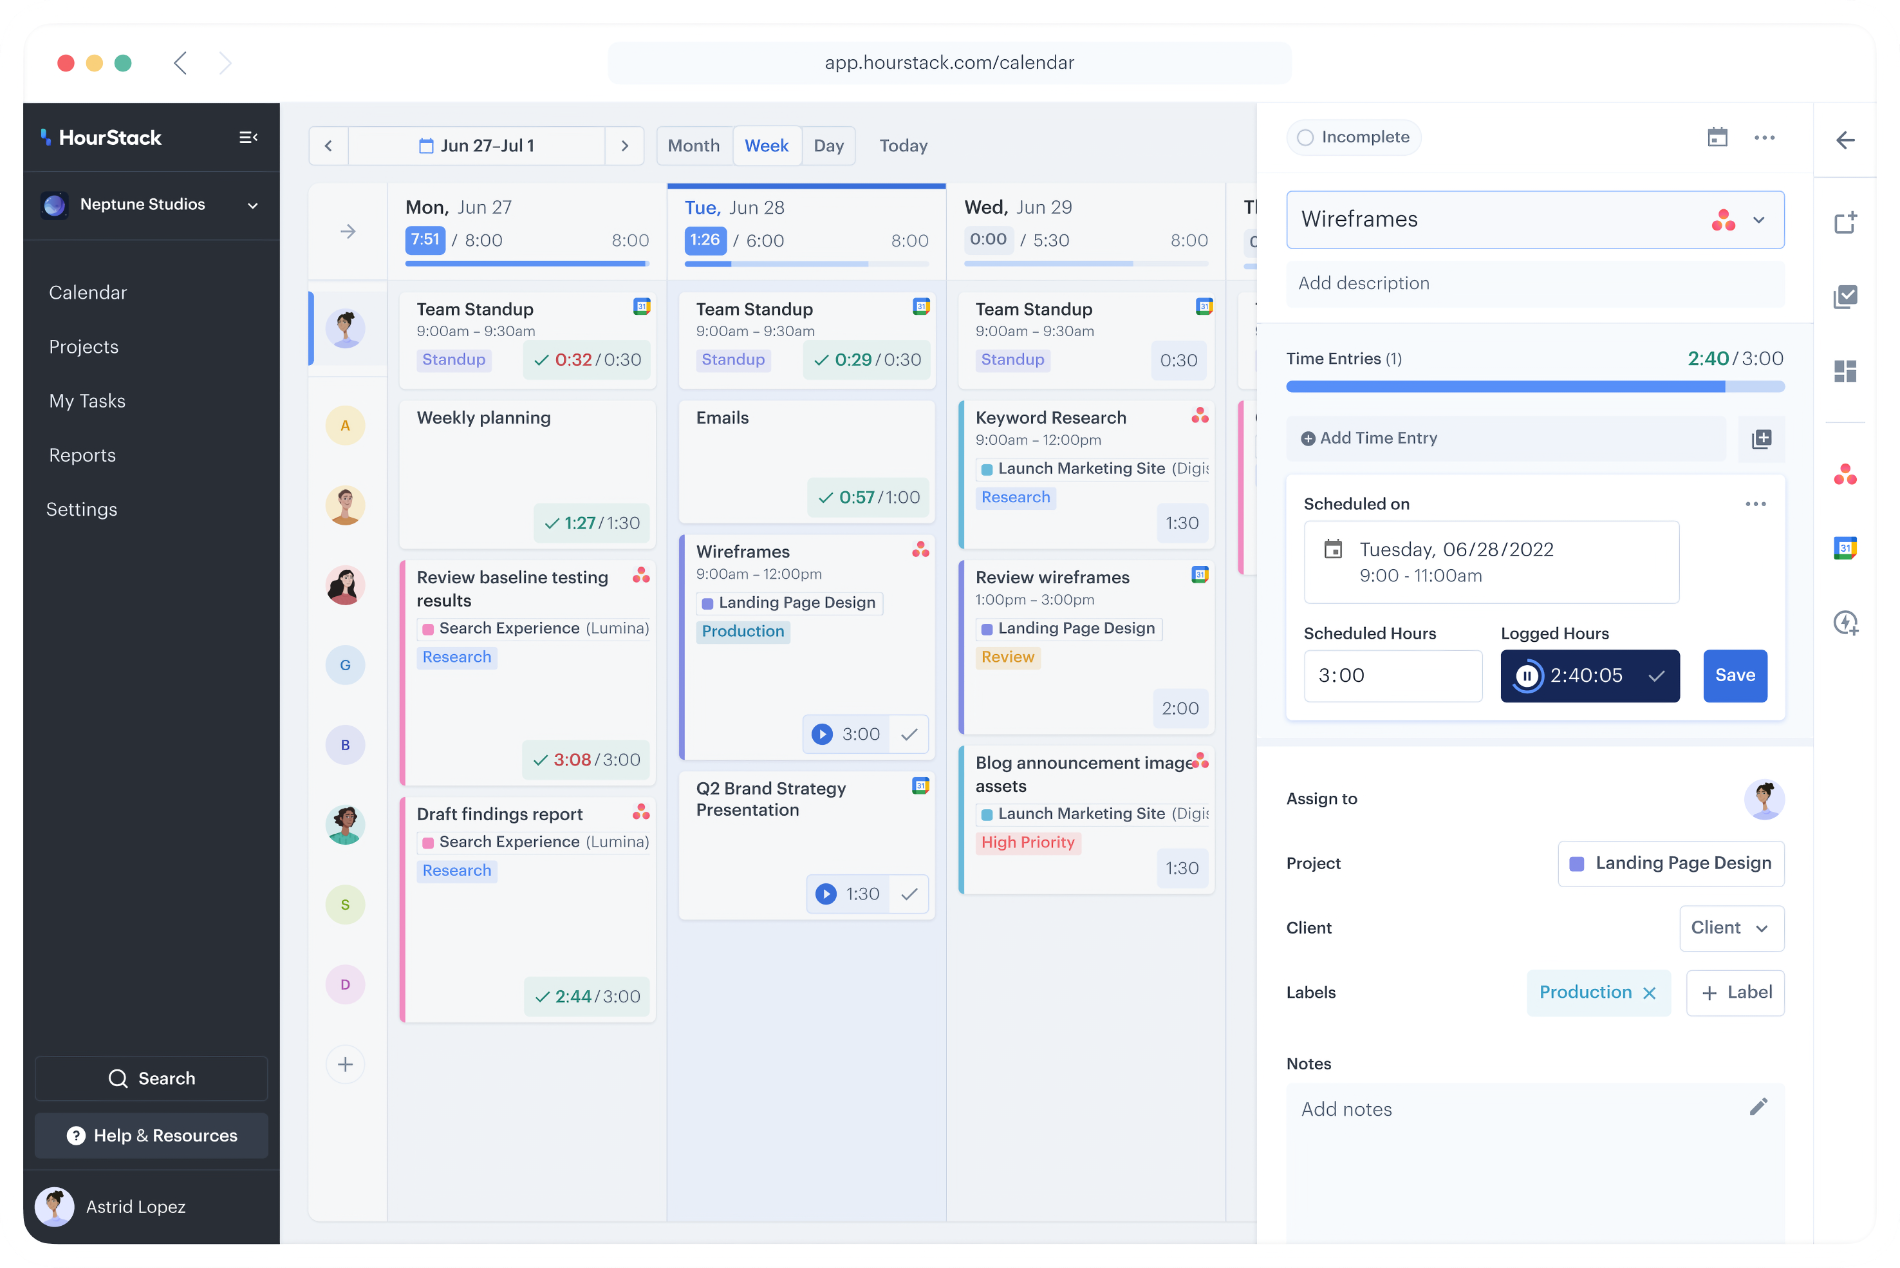 HourStack helps your team organize client projects